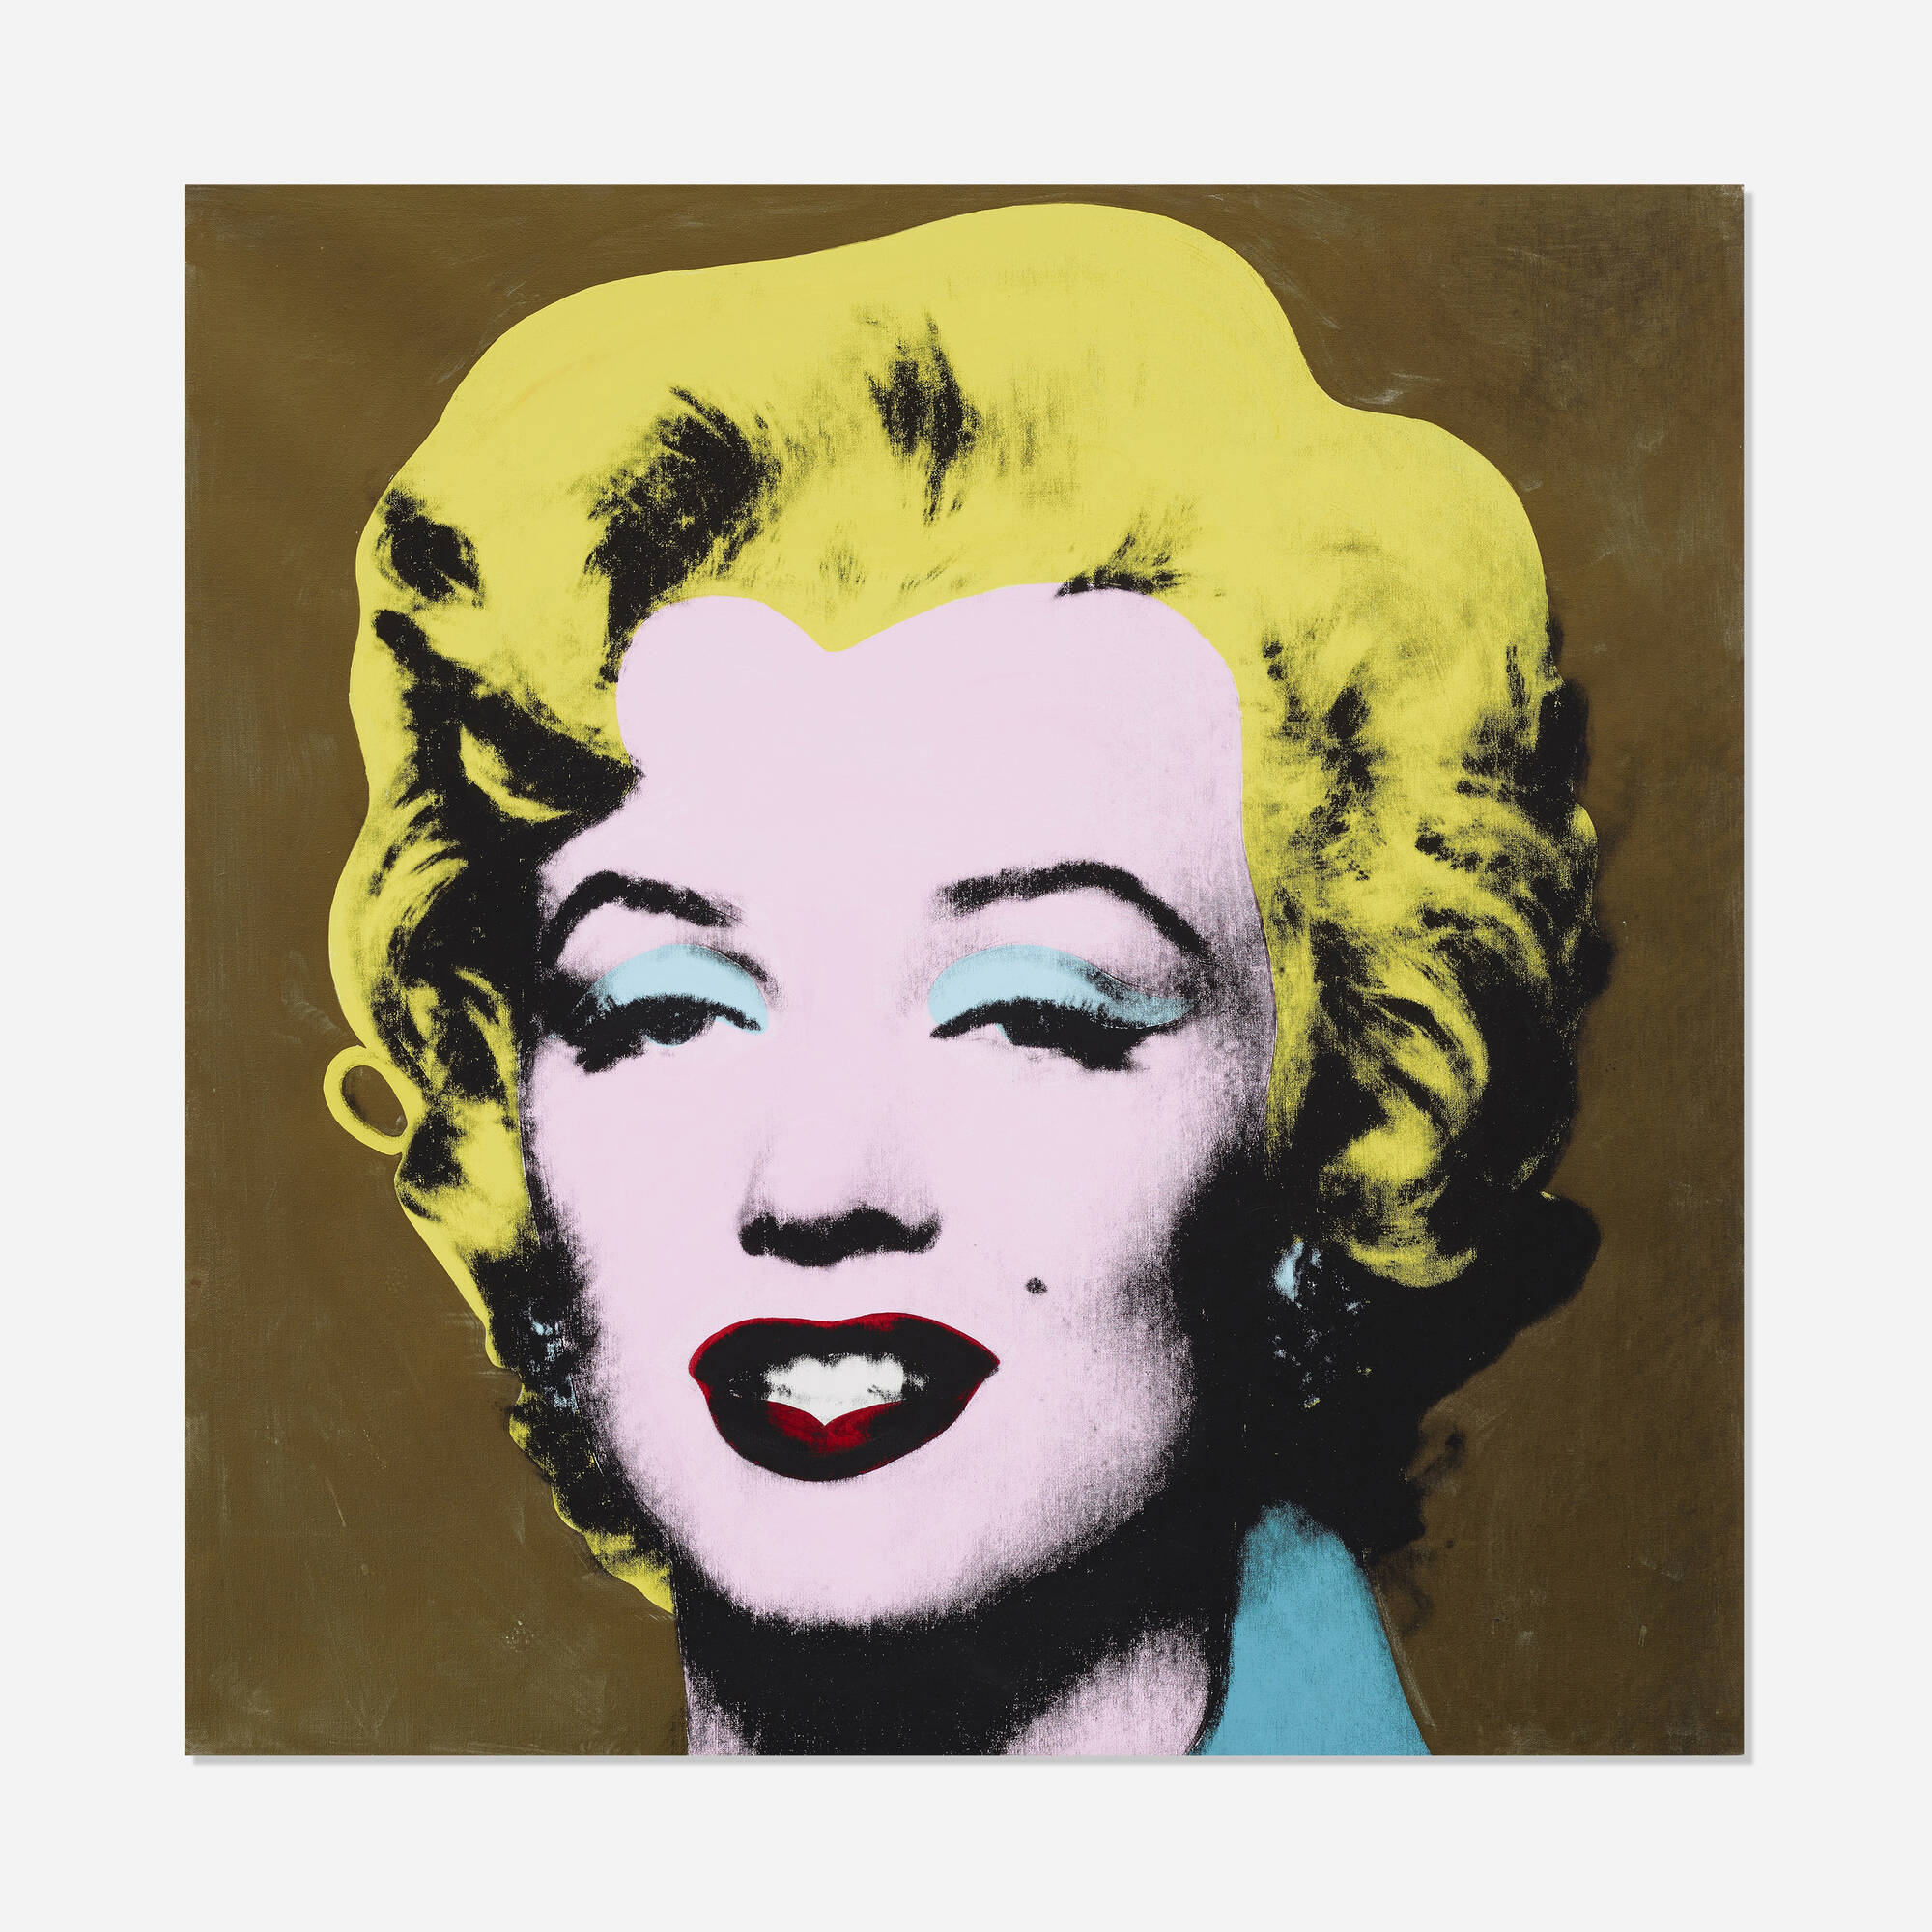 203: DANIEL DOUKE, Study For Andy Warhol Marilyn 1964 Gold Version